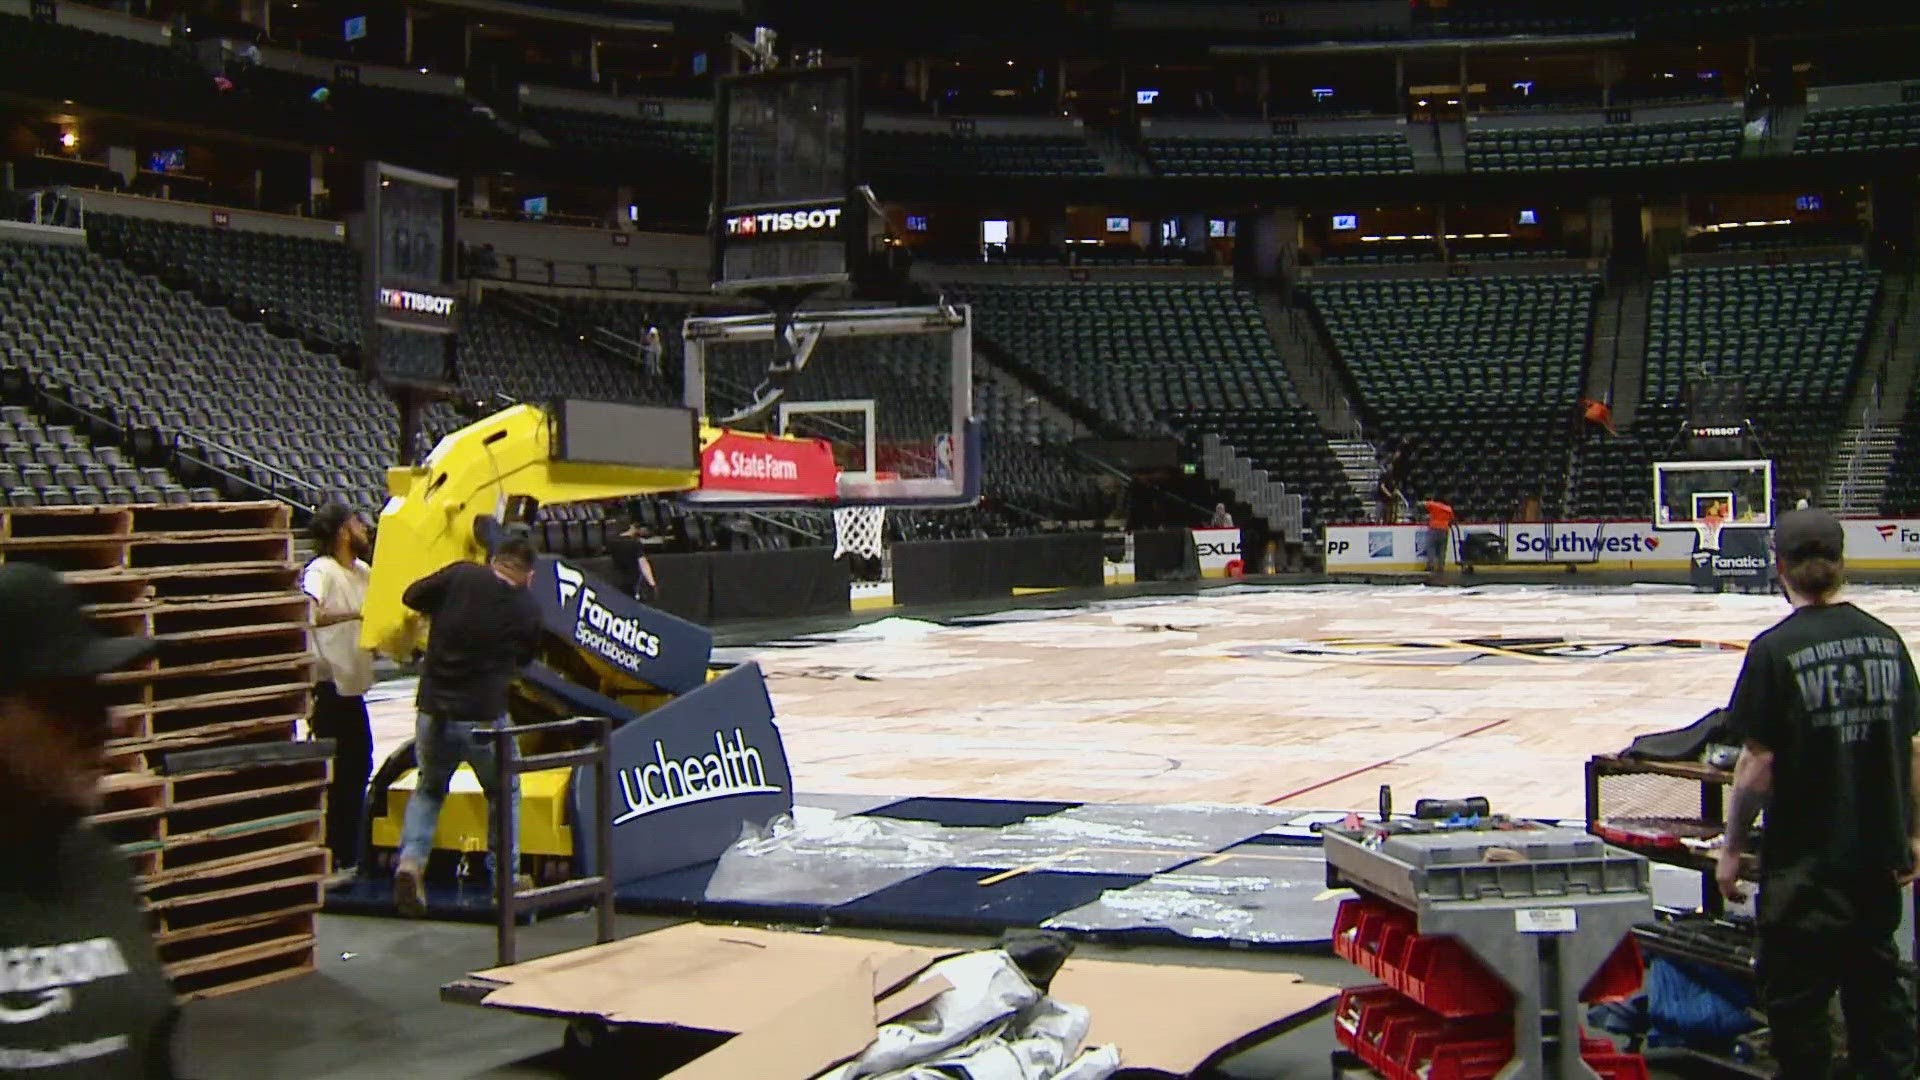 The arena's conversion crew consists of 25-30 people who switch the floors out from hardwood to ice and back again during the Nuggets and Avalanche playing season.